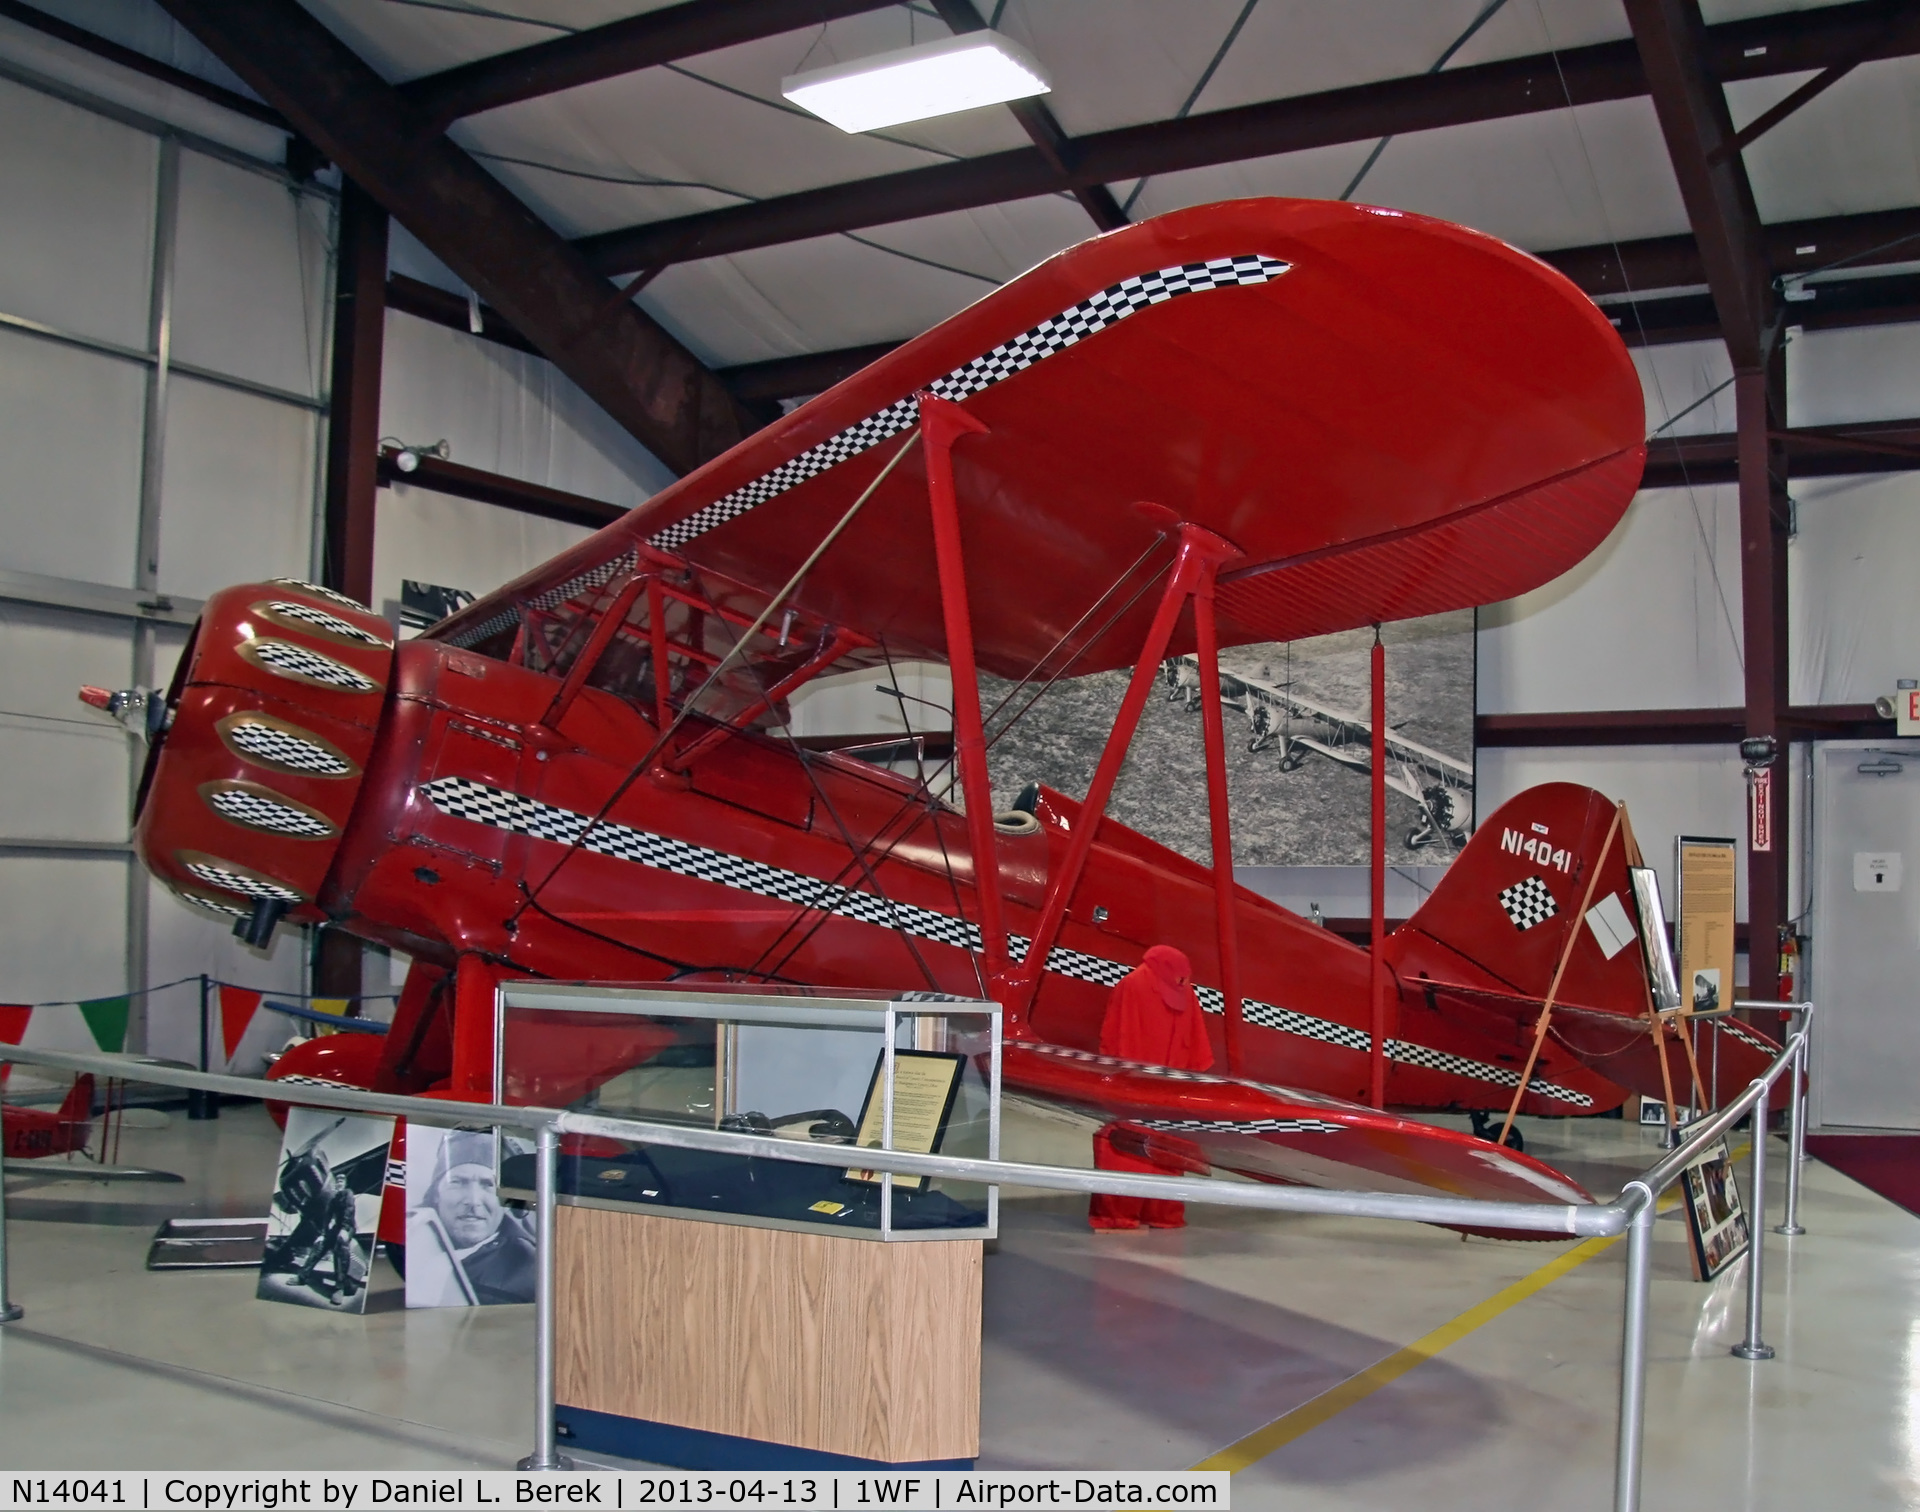 N14041, 1934 Waco UMF C/N 3836, This 1934 beauty has a corner office at the Waco Aircraft Museum, Troy, OH.